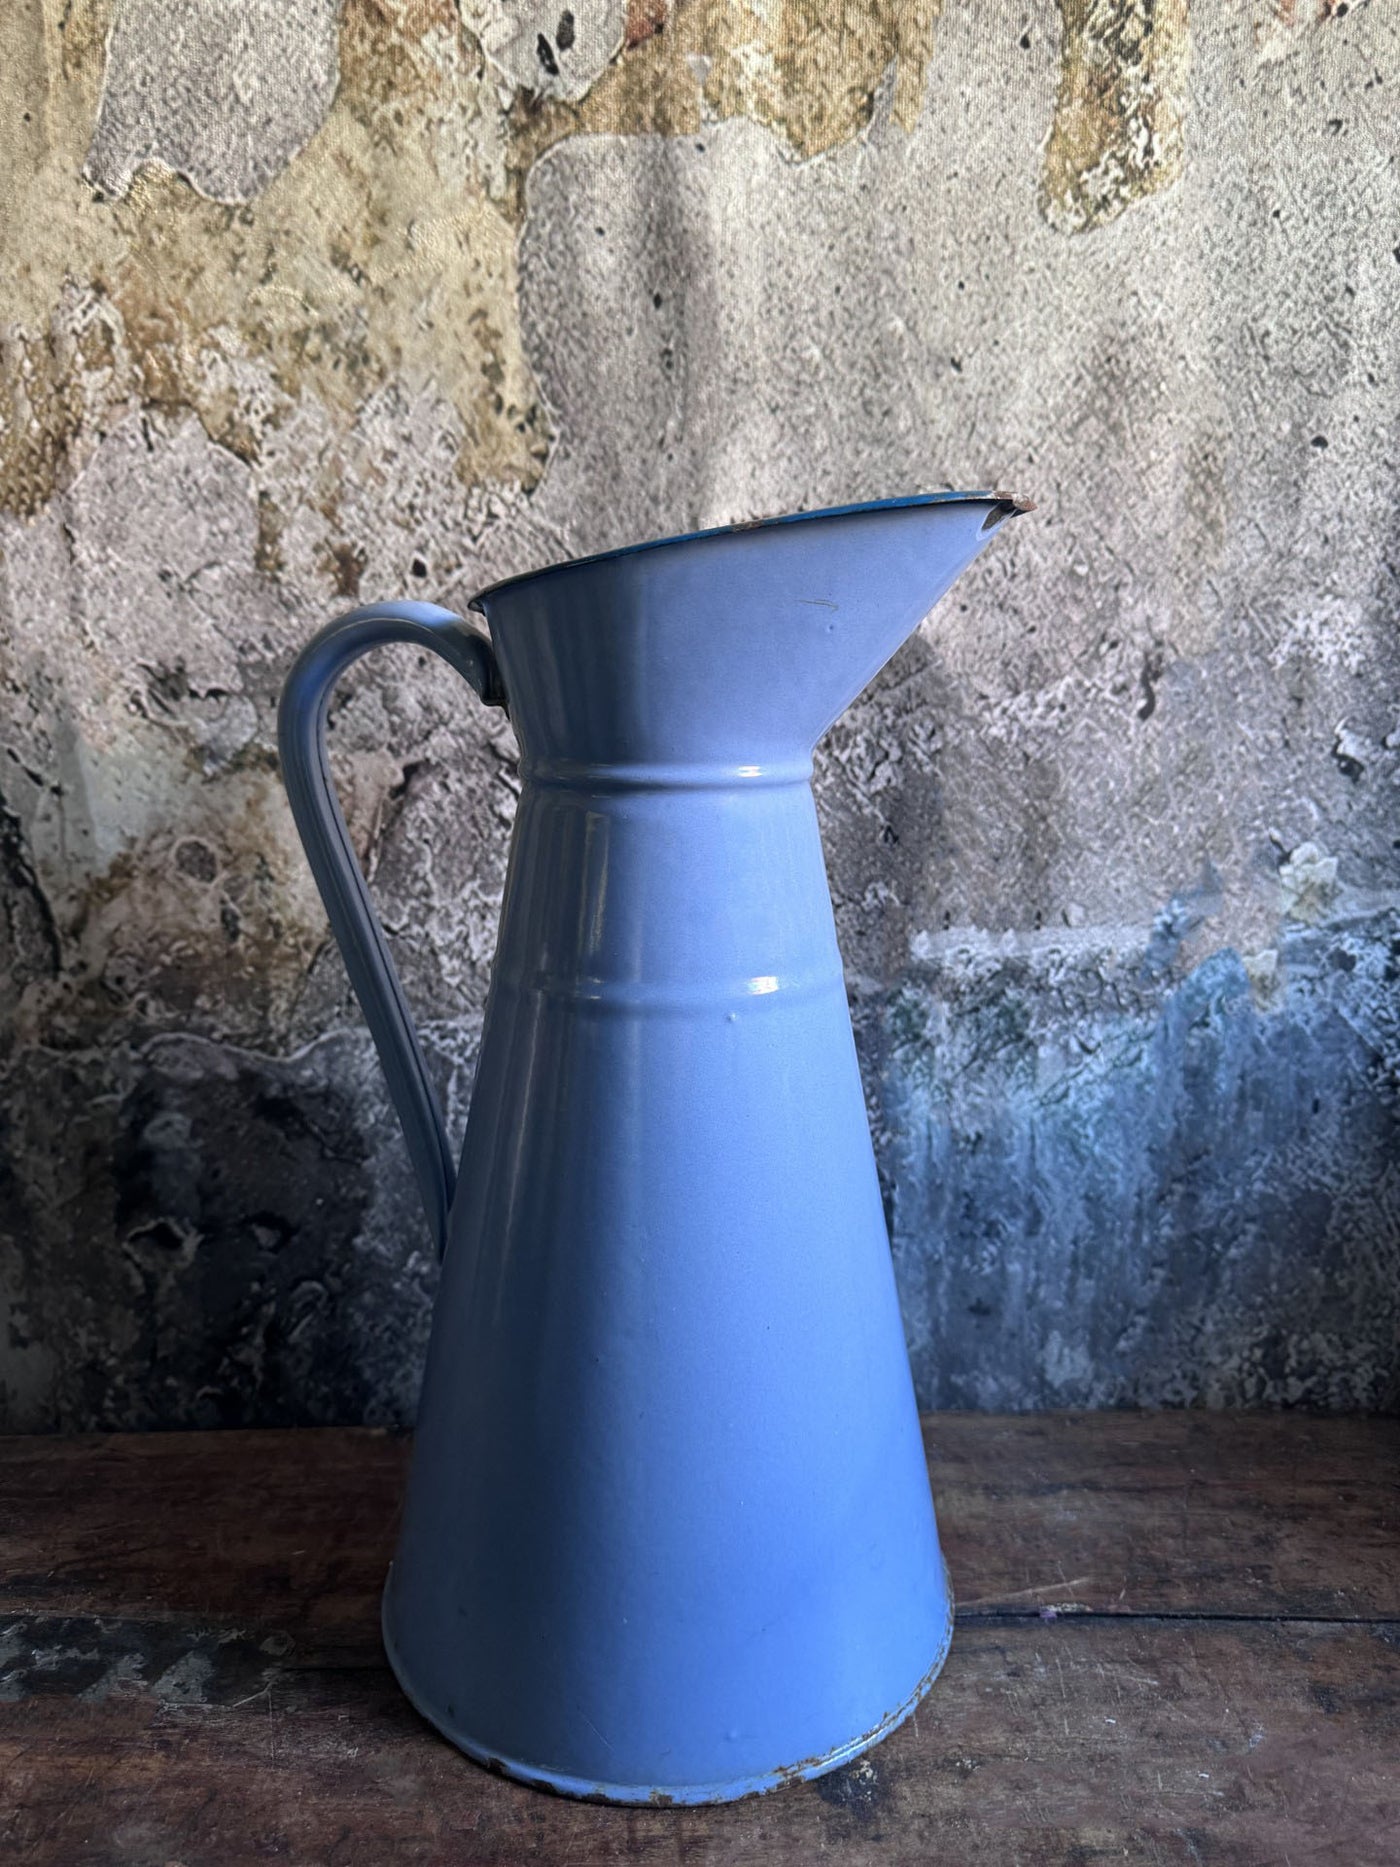 Found Vintage Tall French Enameled Pitcher - Choose Color